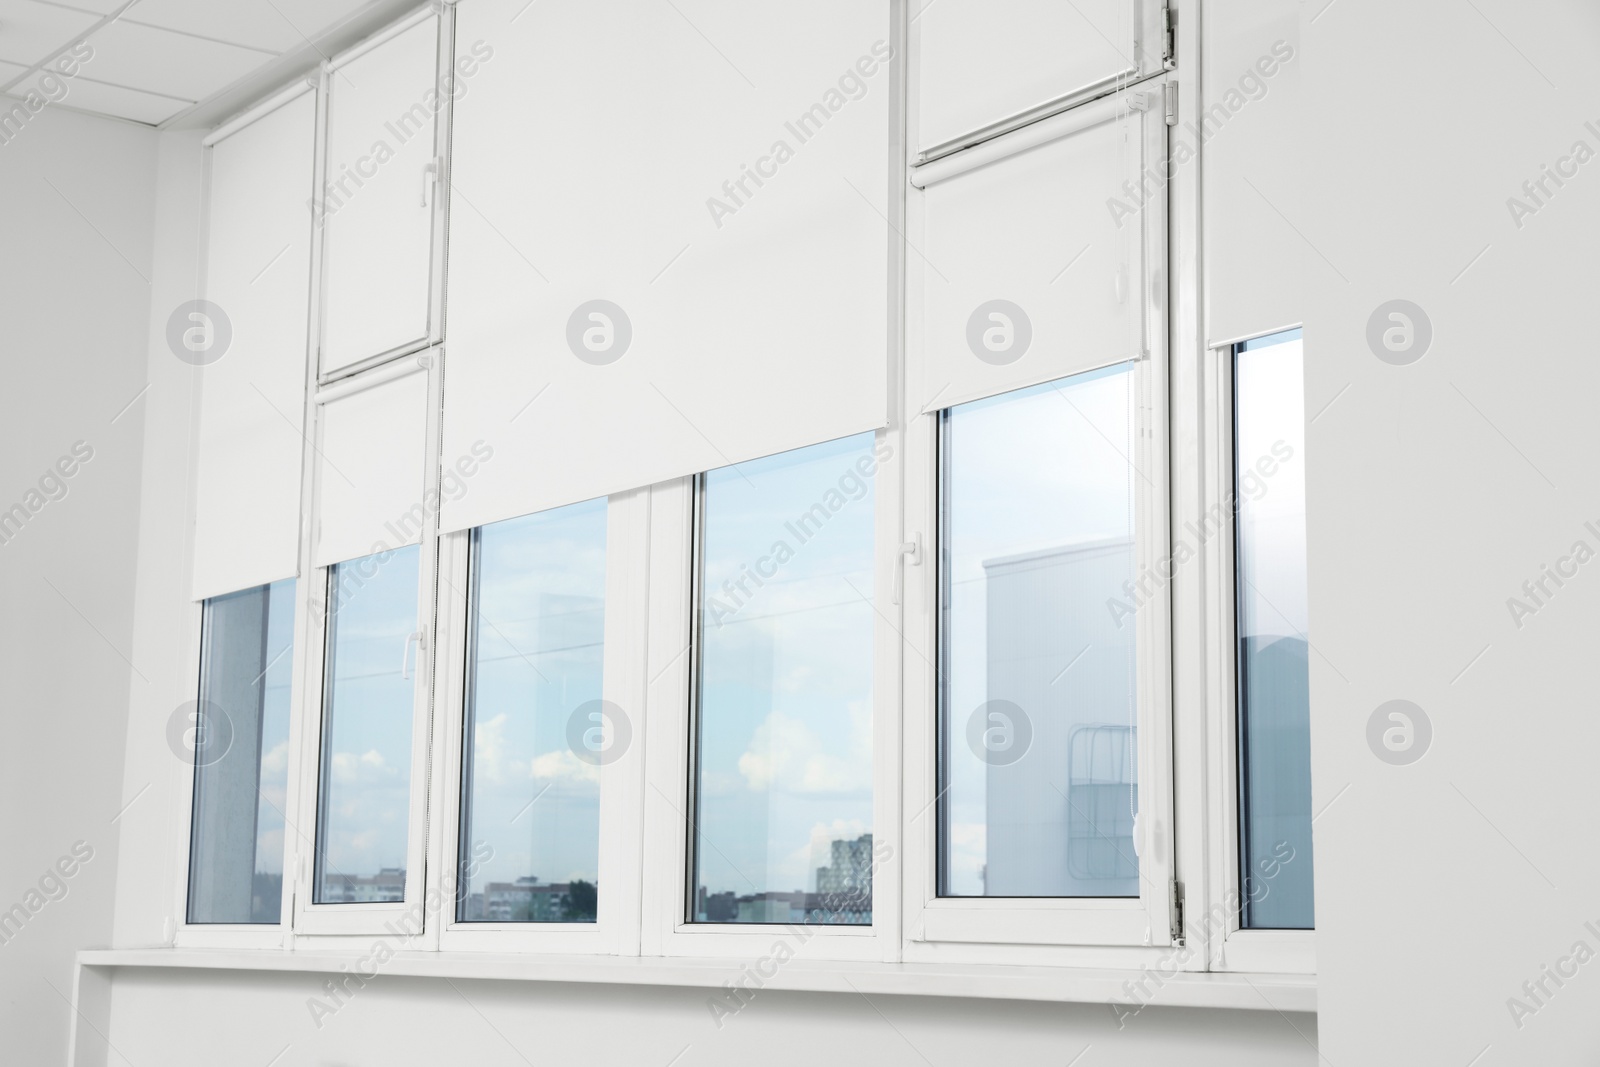 Photo of Plastic windows with white roller blinds indoors